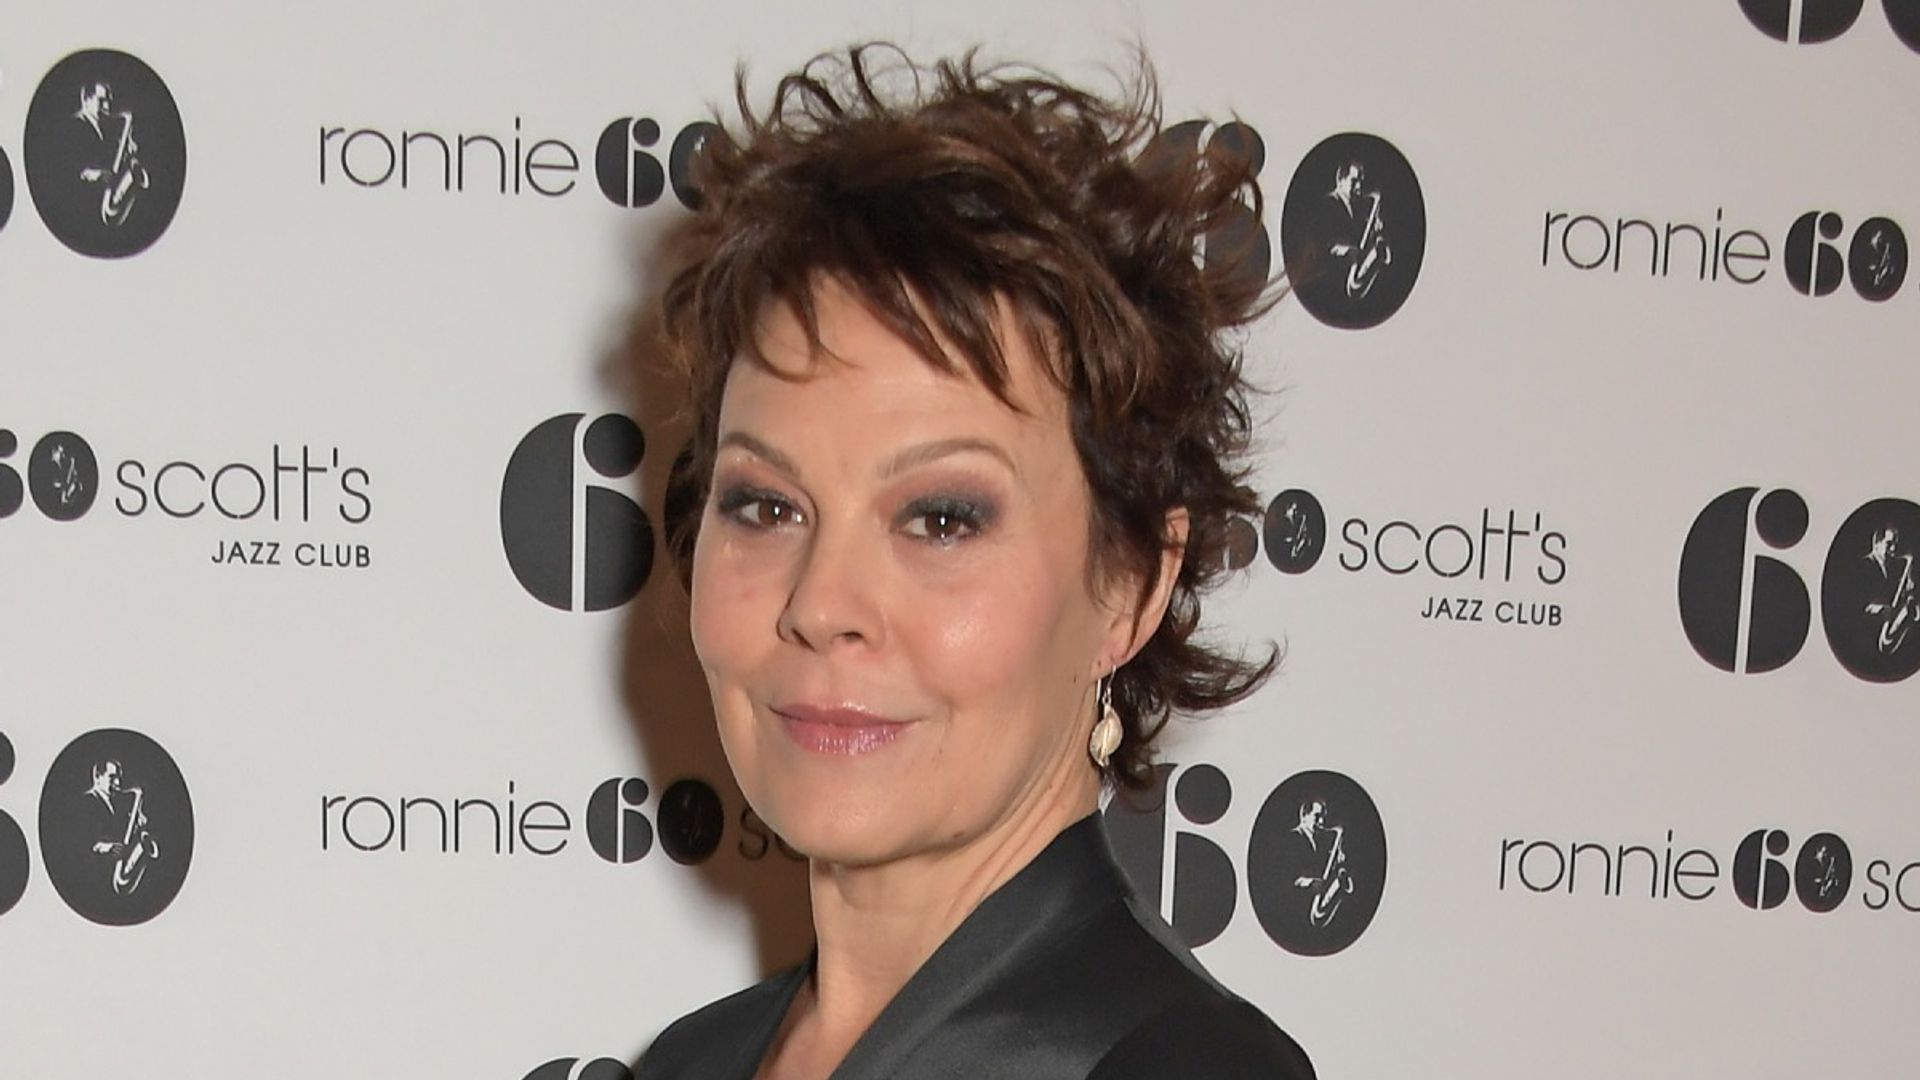 Celebrities pay tribute to late actress Helen McCrory: JK Rowling, Piers Morgan & more